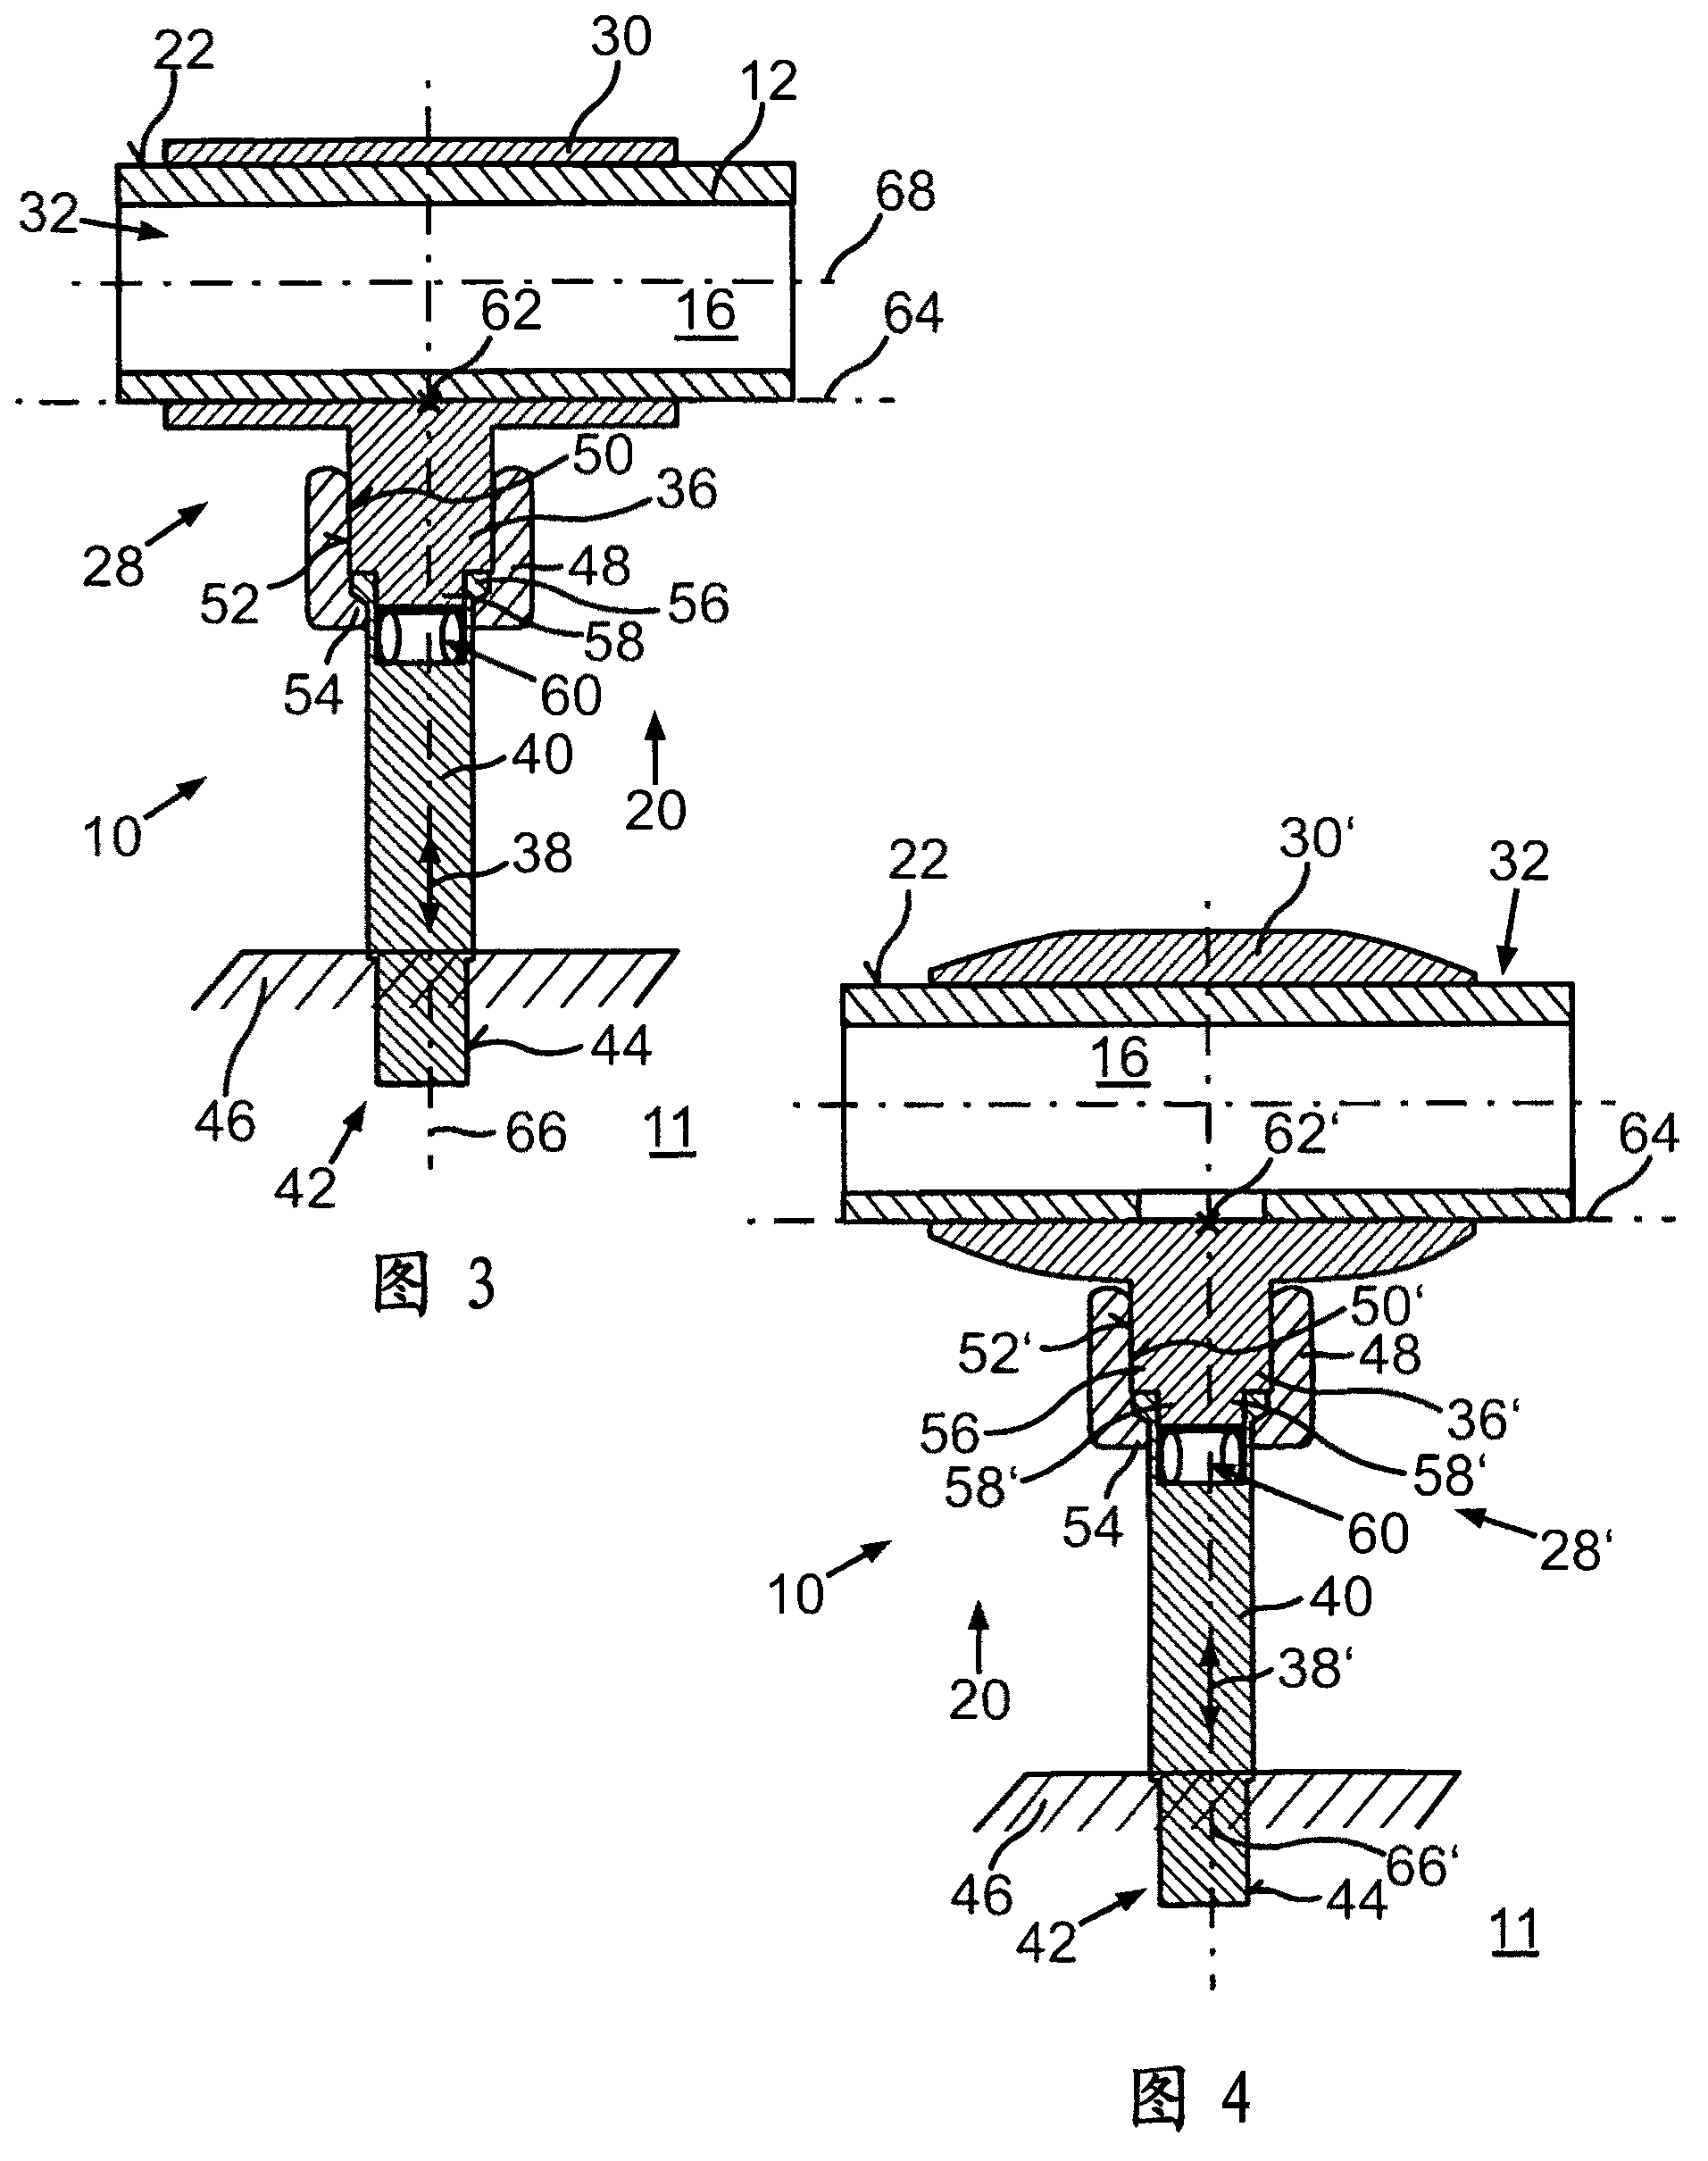 A fastening arrangement of a fuel supply device on an internal combustion engine, and a method for fastening a fuel supply device to the internal combustion engine